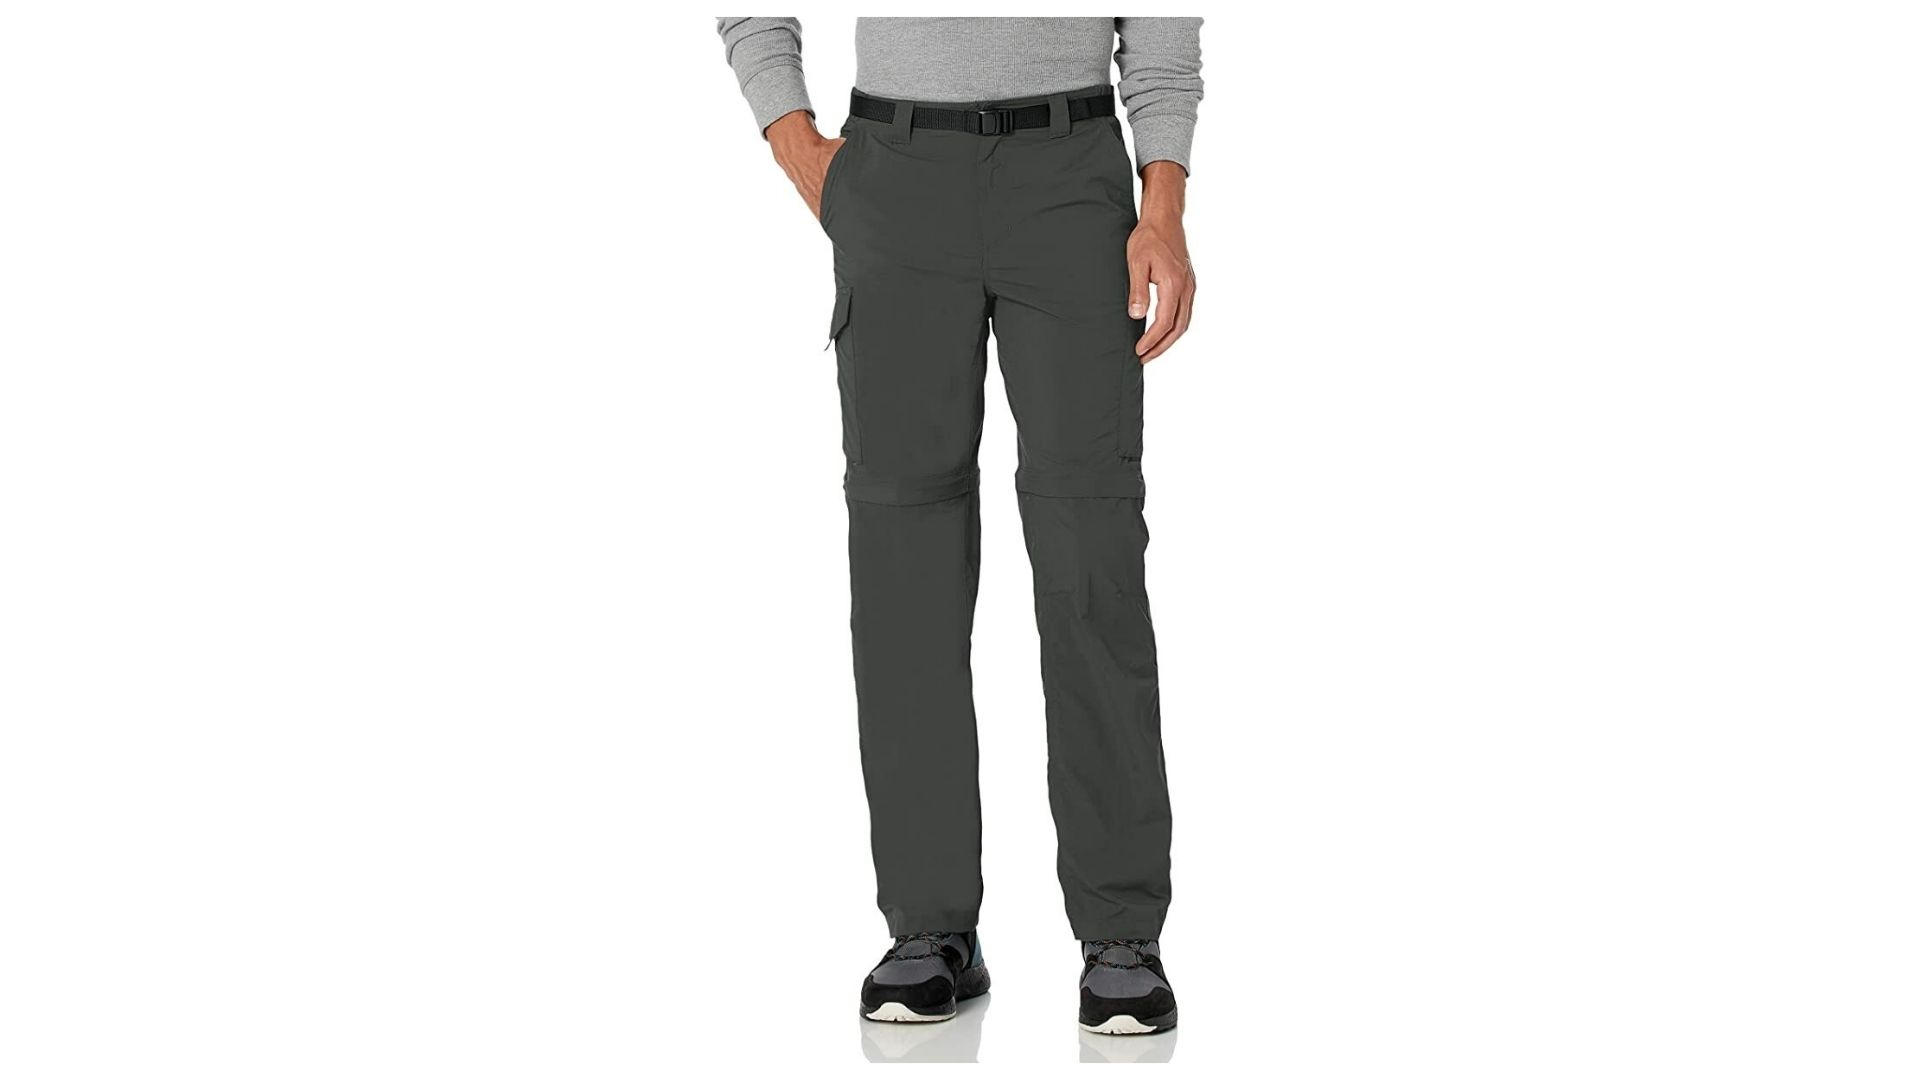 Best Hiking Pants for Men (Review & Buying Guide) in 2021 - Task